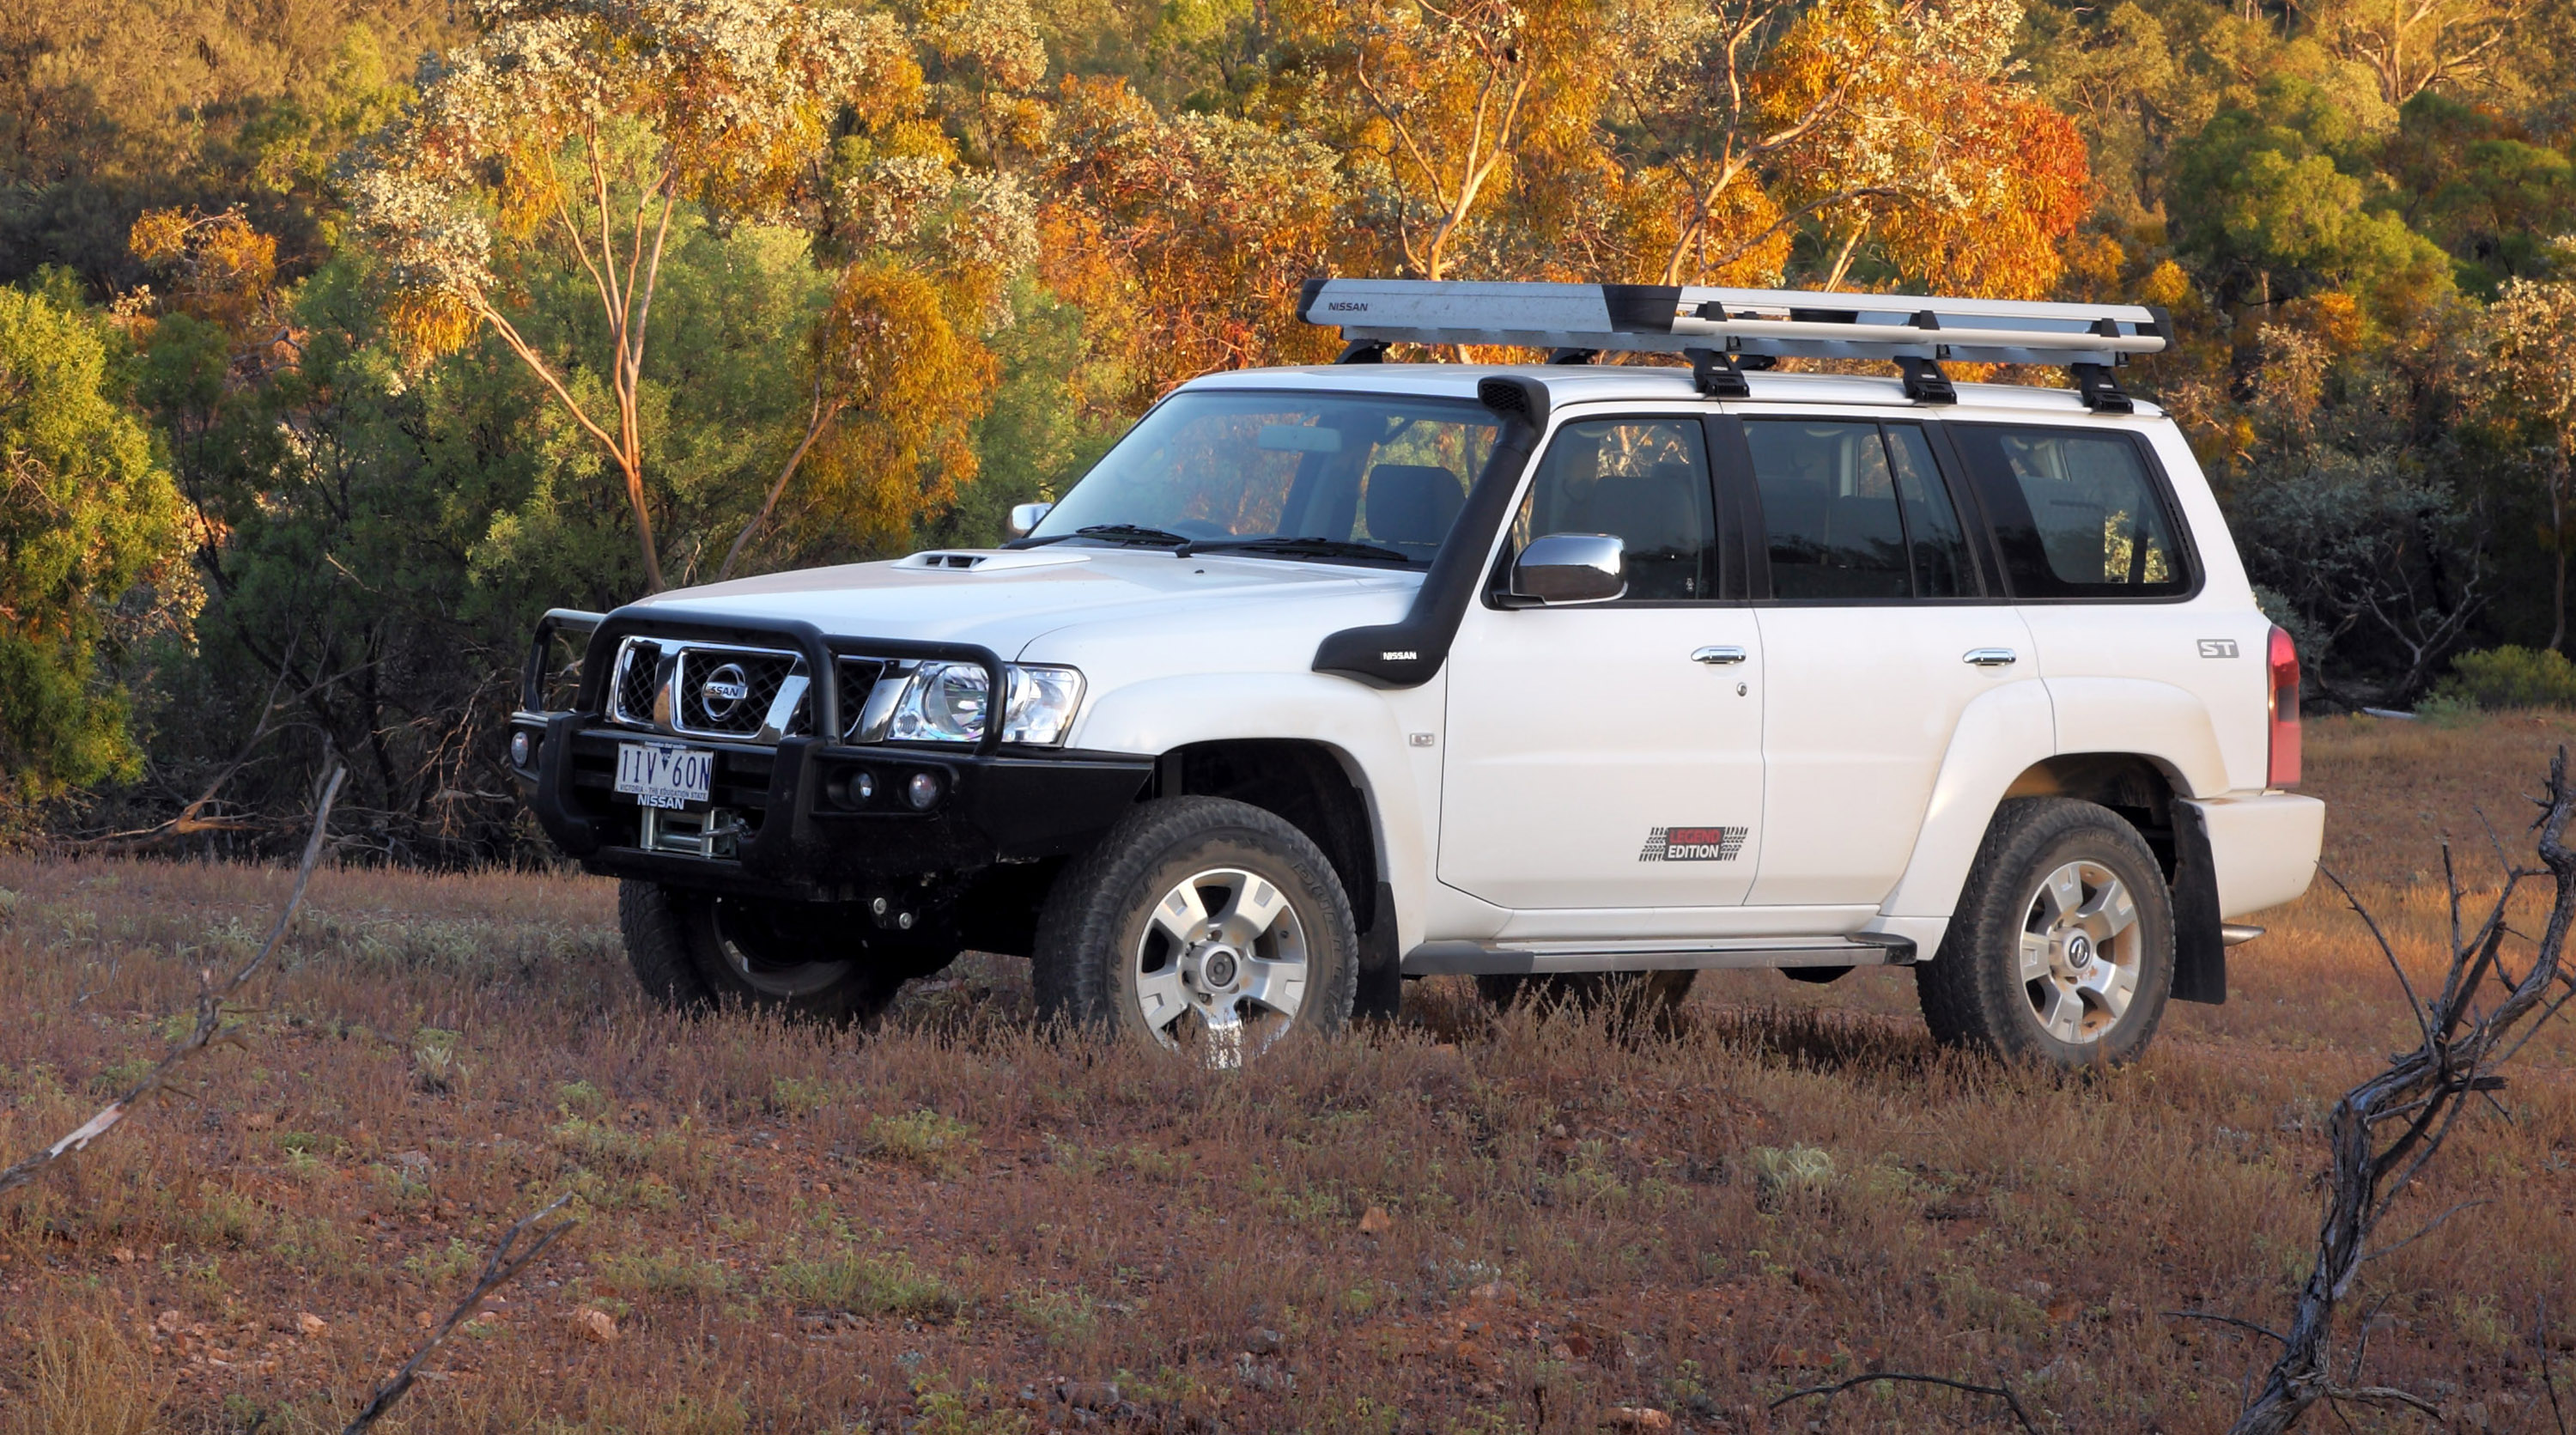 2016 Nissan Patrol Y61 Legend Edition review CarAdvice